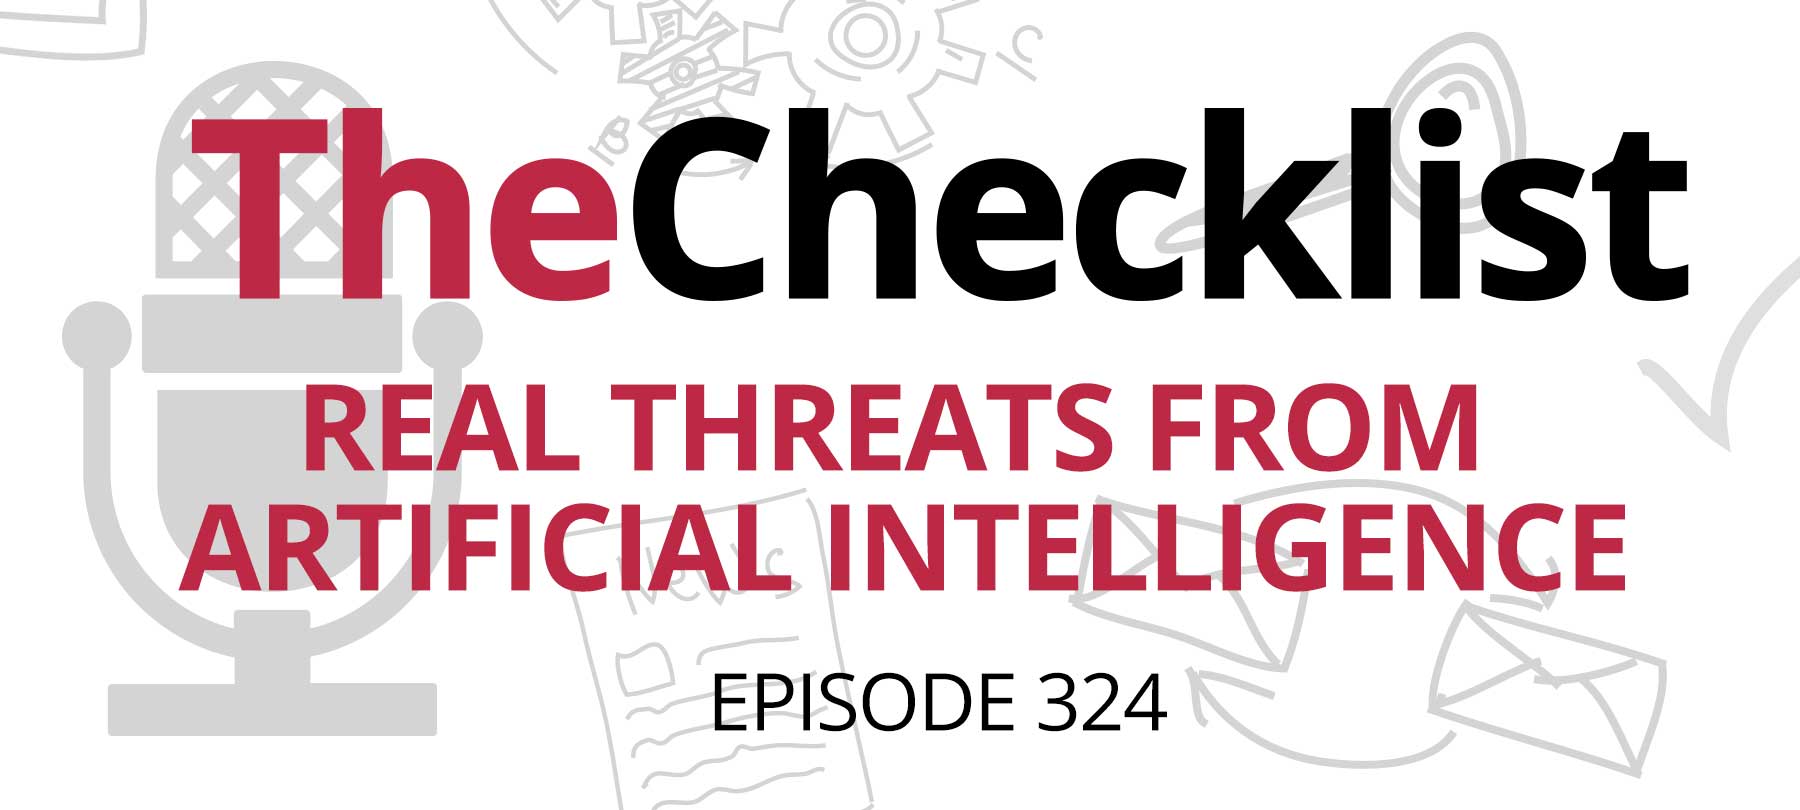 Checklist 324: Real Threats from Artificial Intelligence